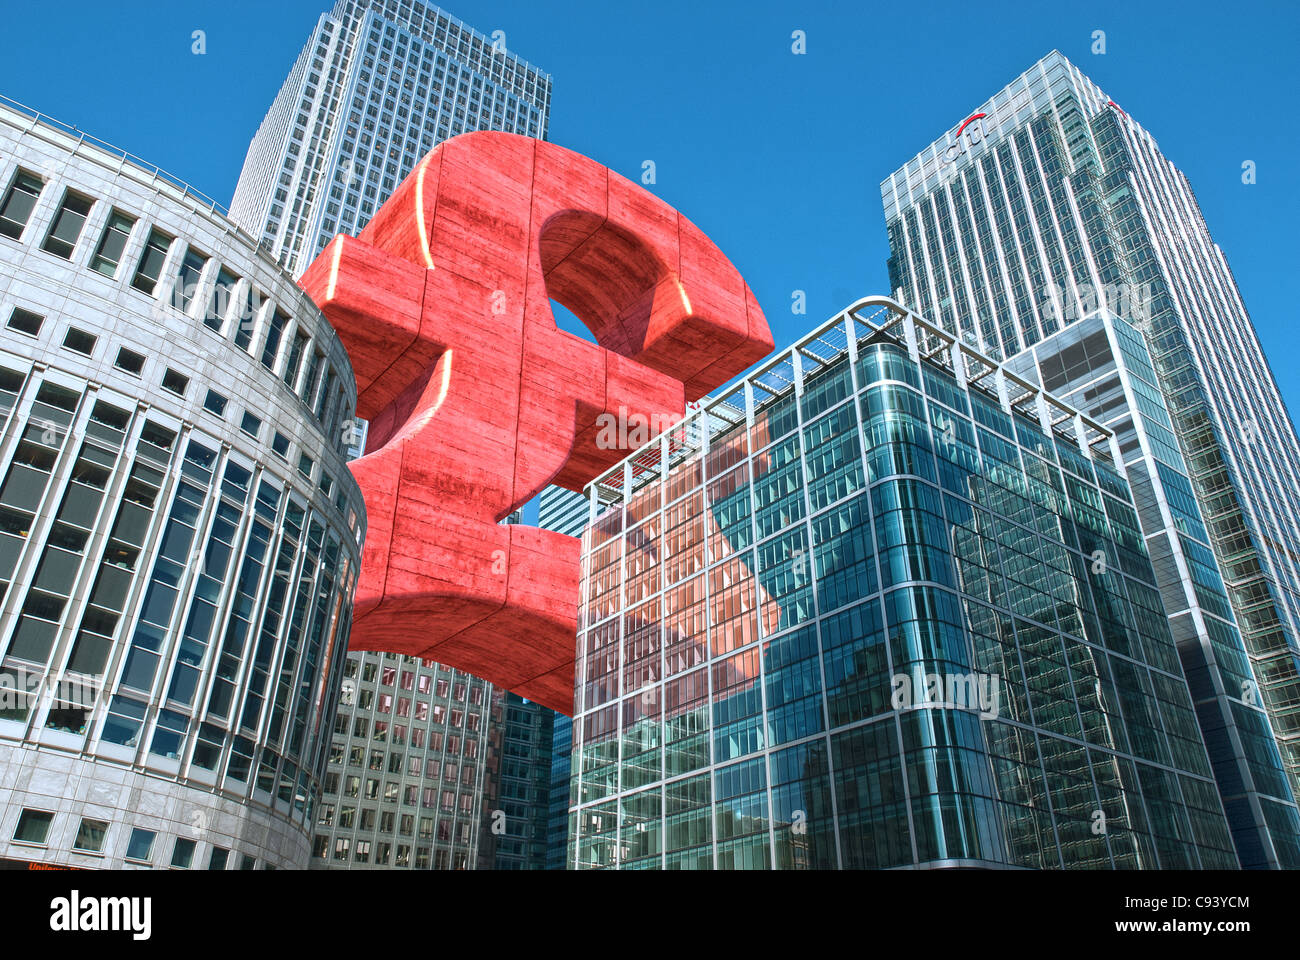 Digitally altered Photograph by hitandrun media. A Giant Pound Sterling symbol, floating between buildings in Canary Wharf, Lond Stock Photo